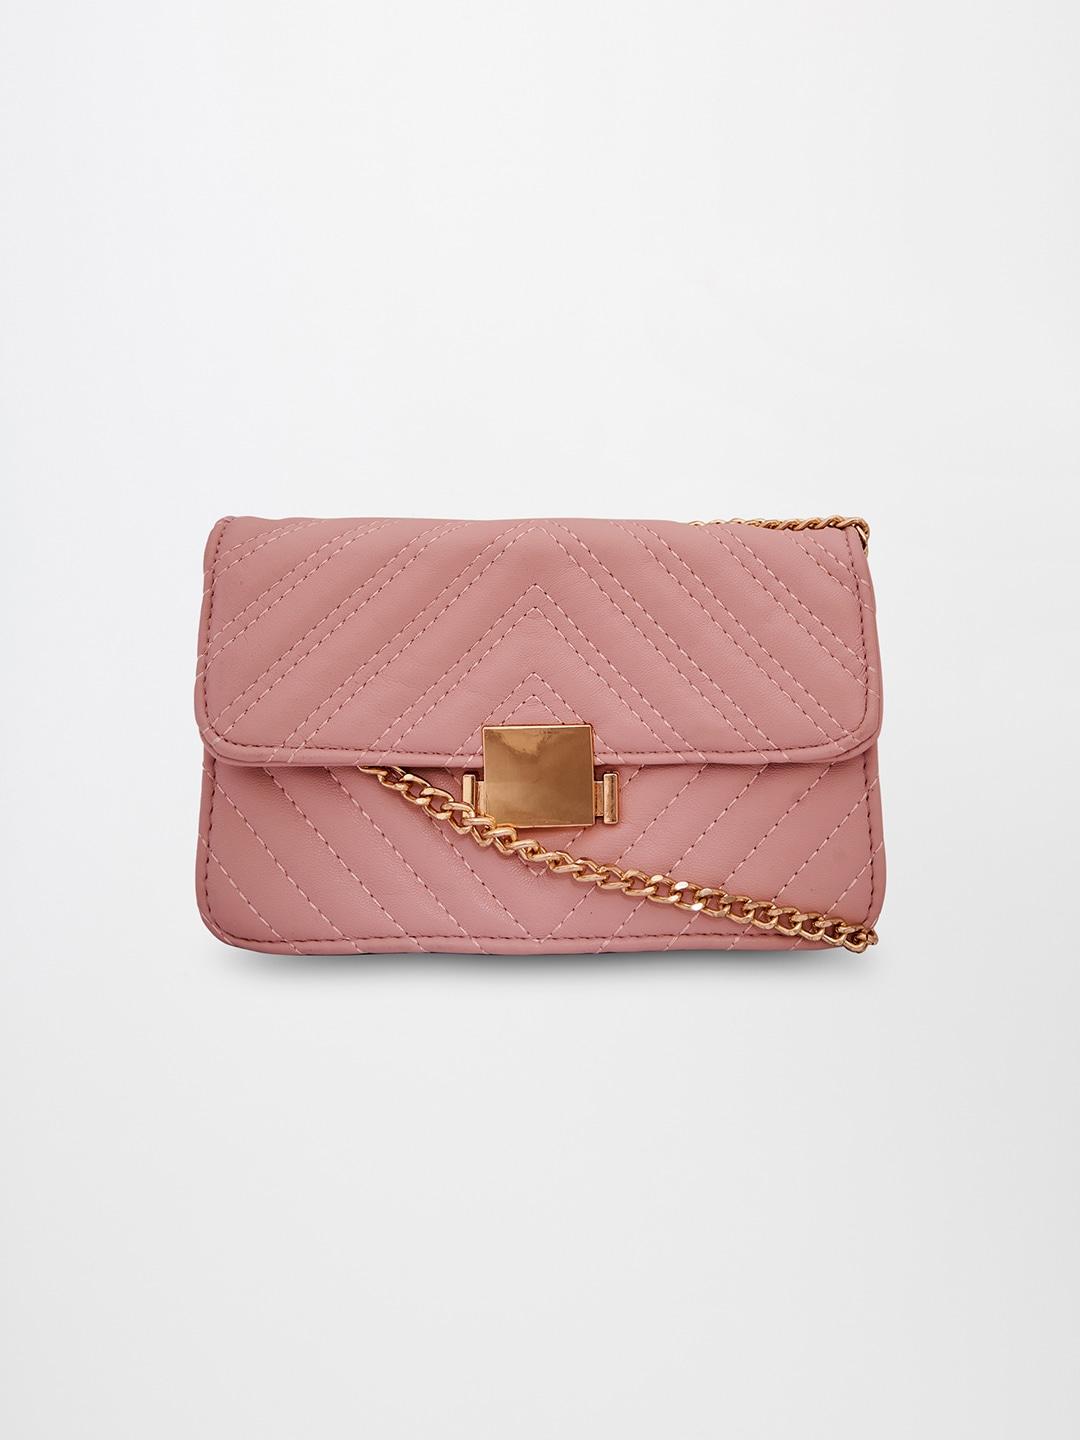 Global Desi Pink Textured Swagger Handheld Bag with Quilted